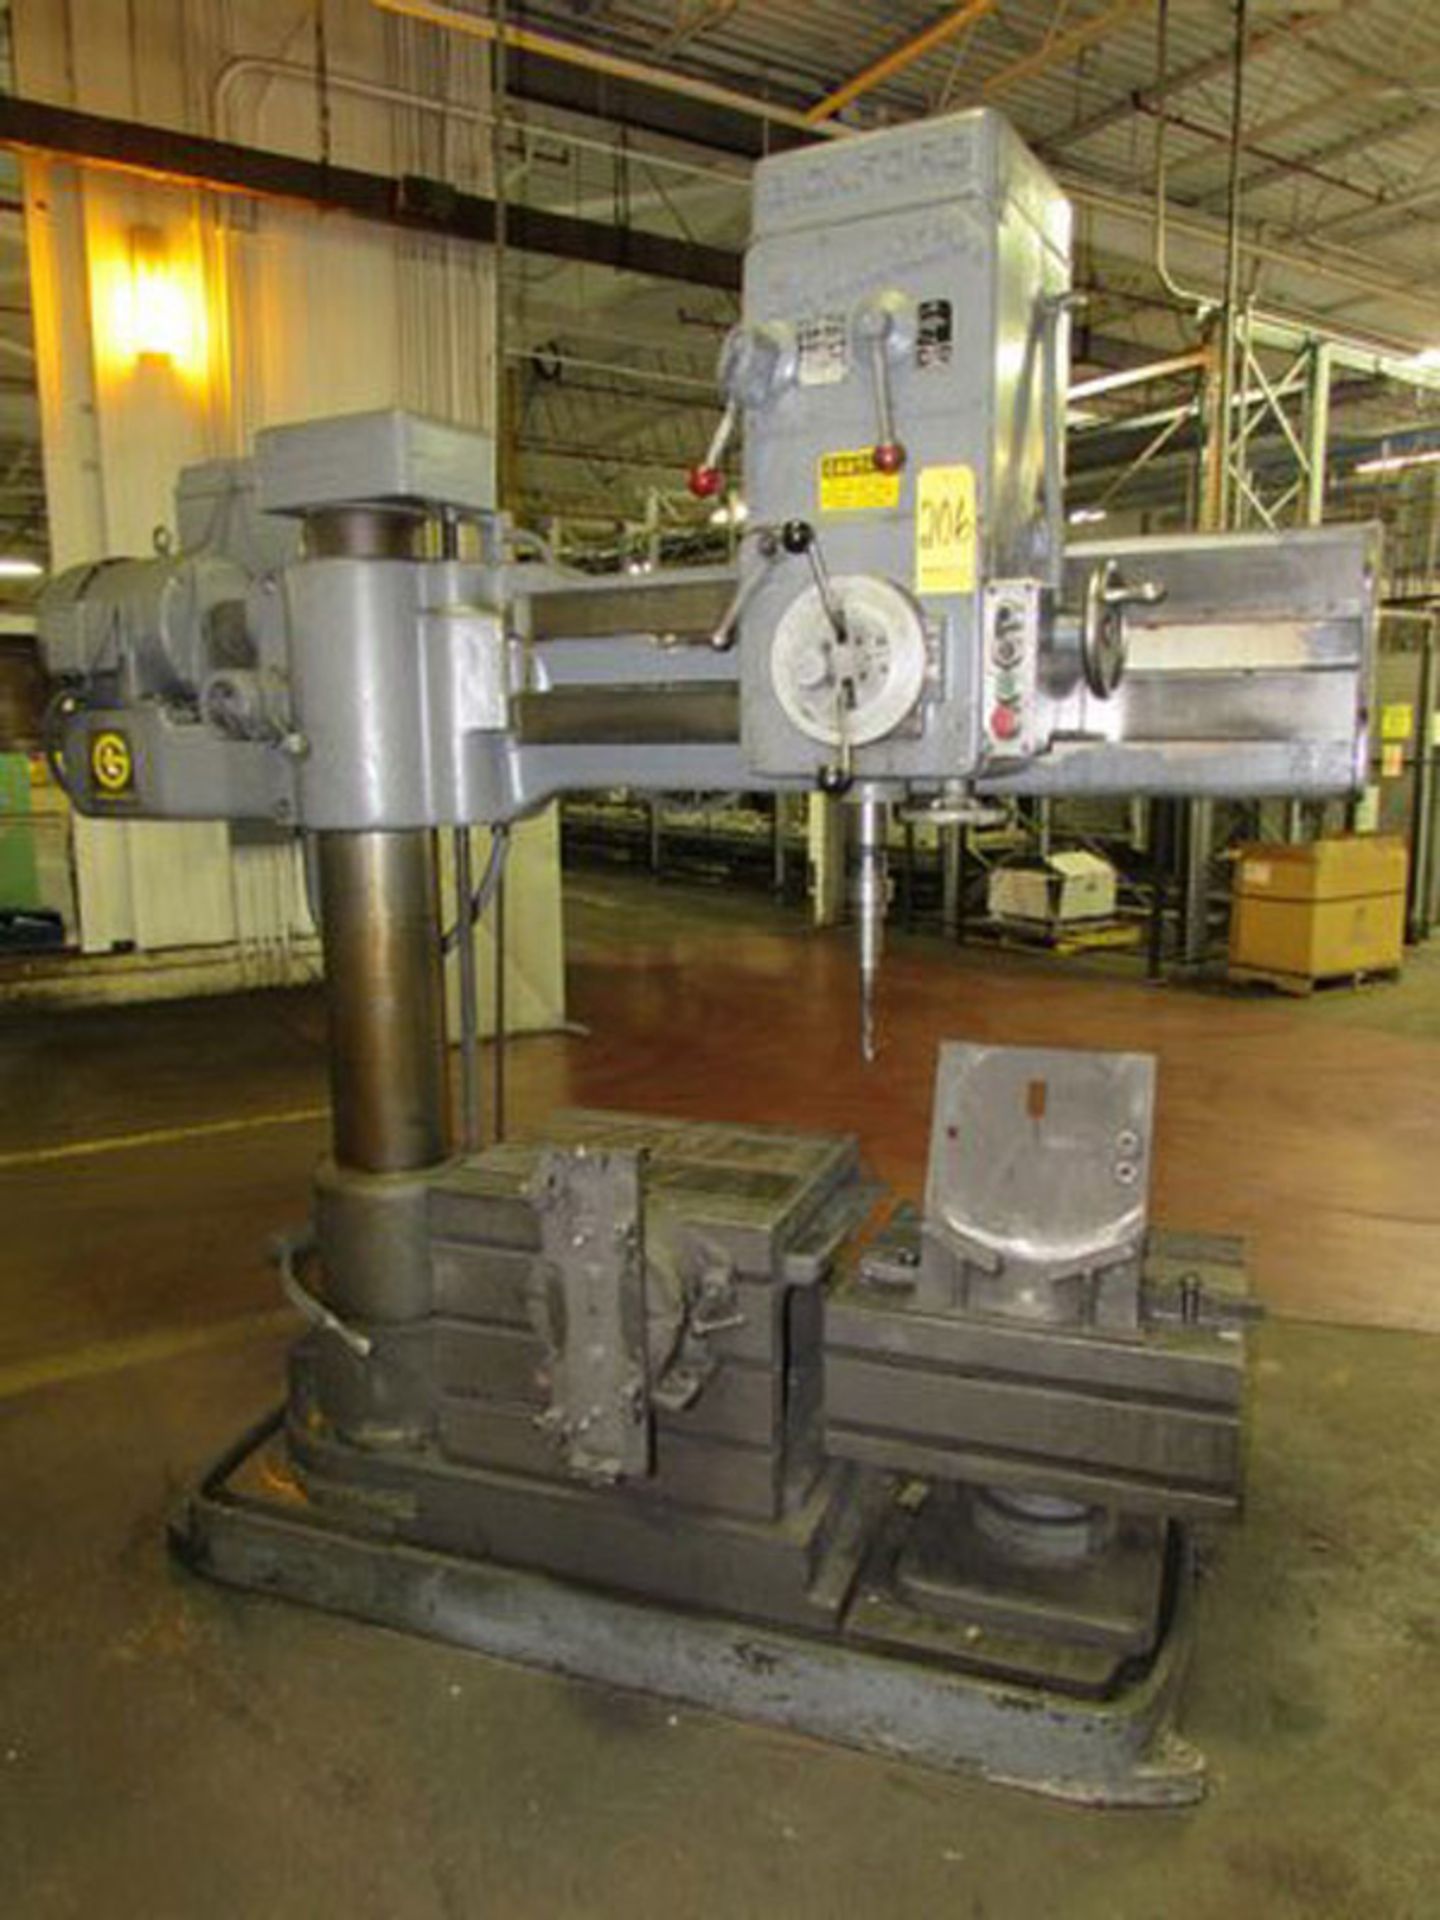 Giddings & Lewis Bickford 2R Chipmaster Radial Arm Drill, S/N 2R10, 4’ x 9'', 48- 1.200 RPM, Power